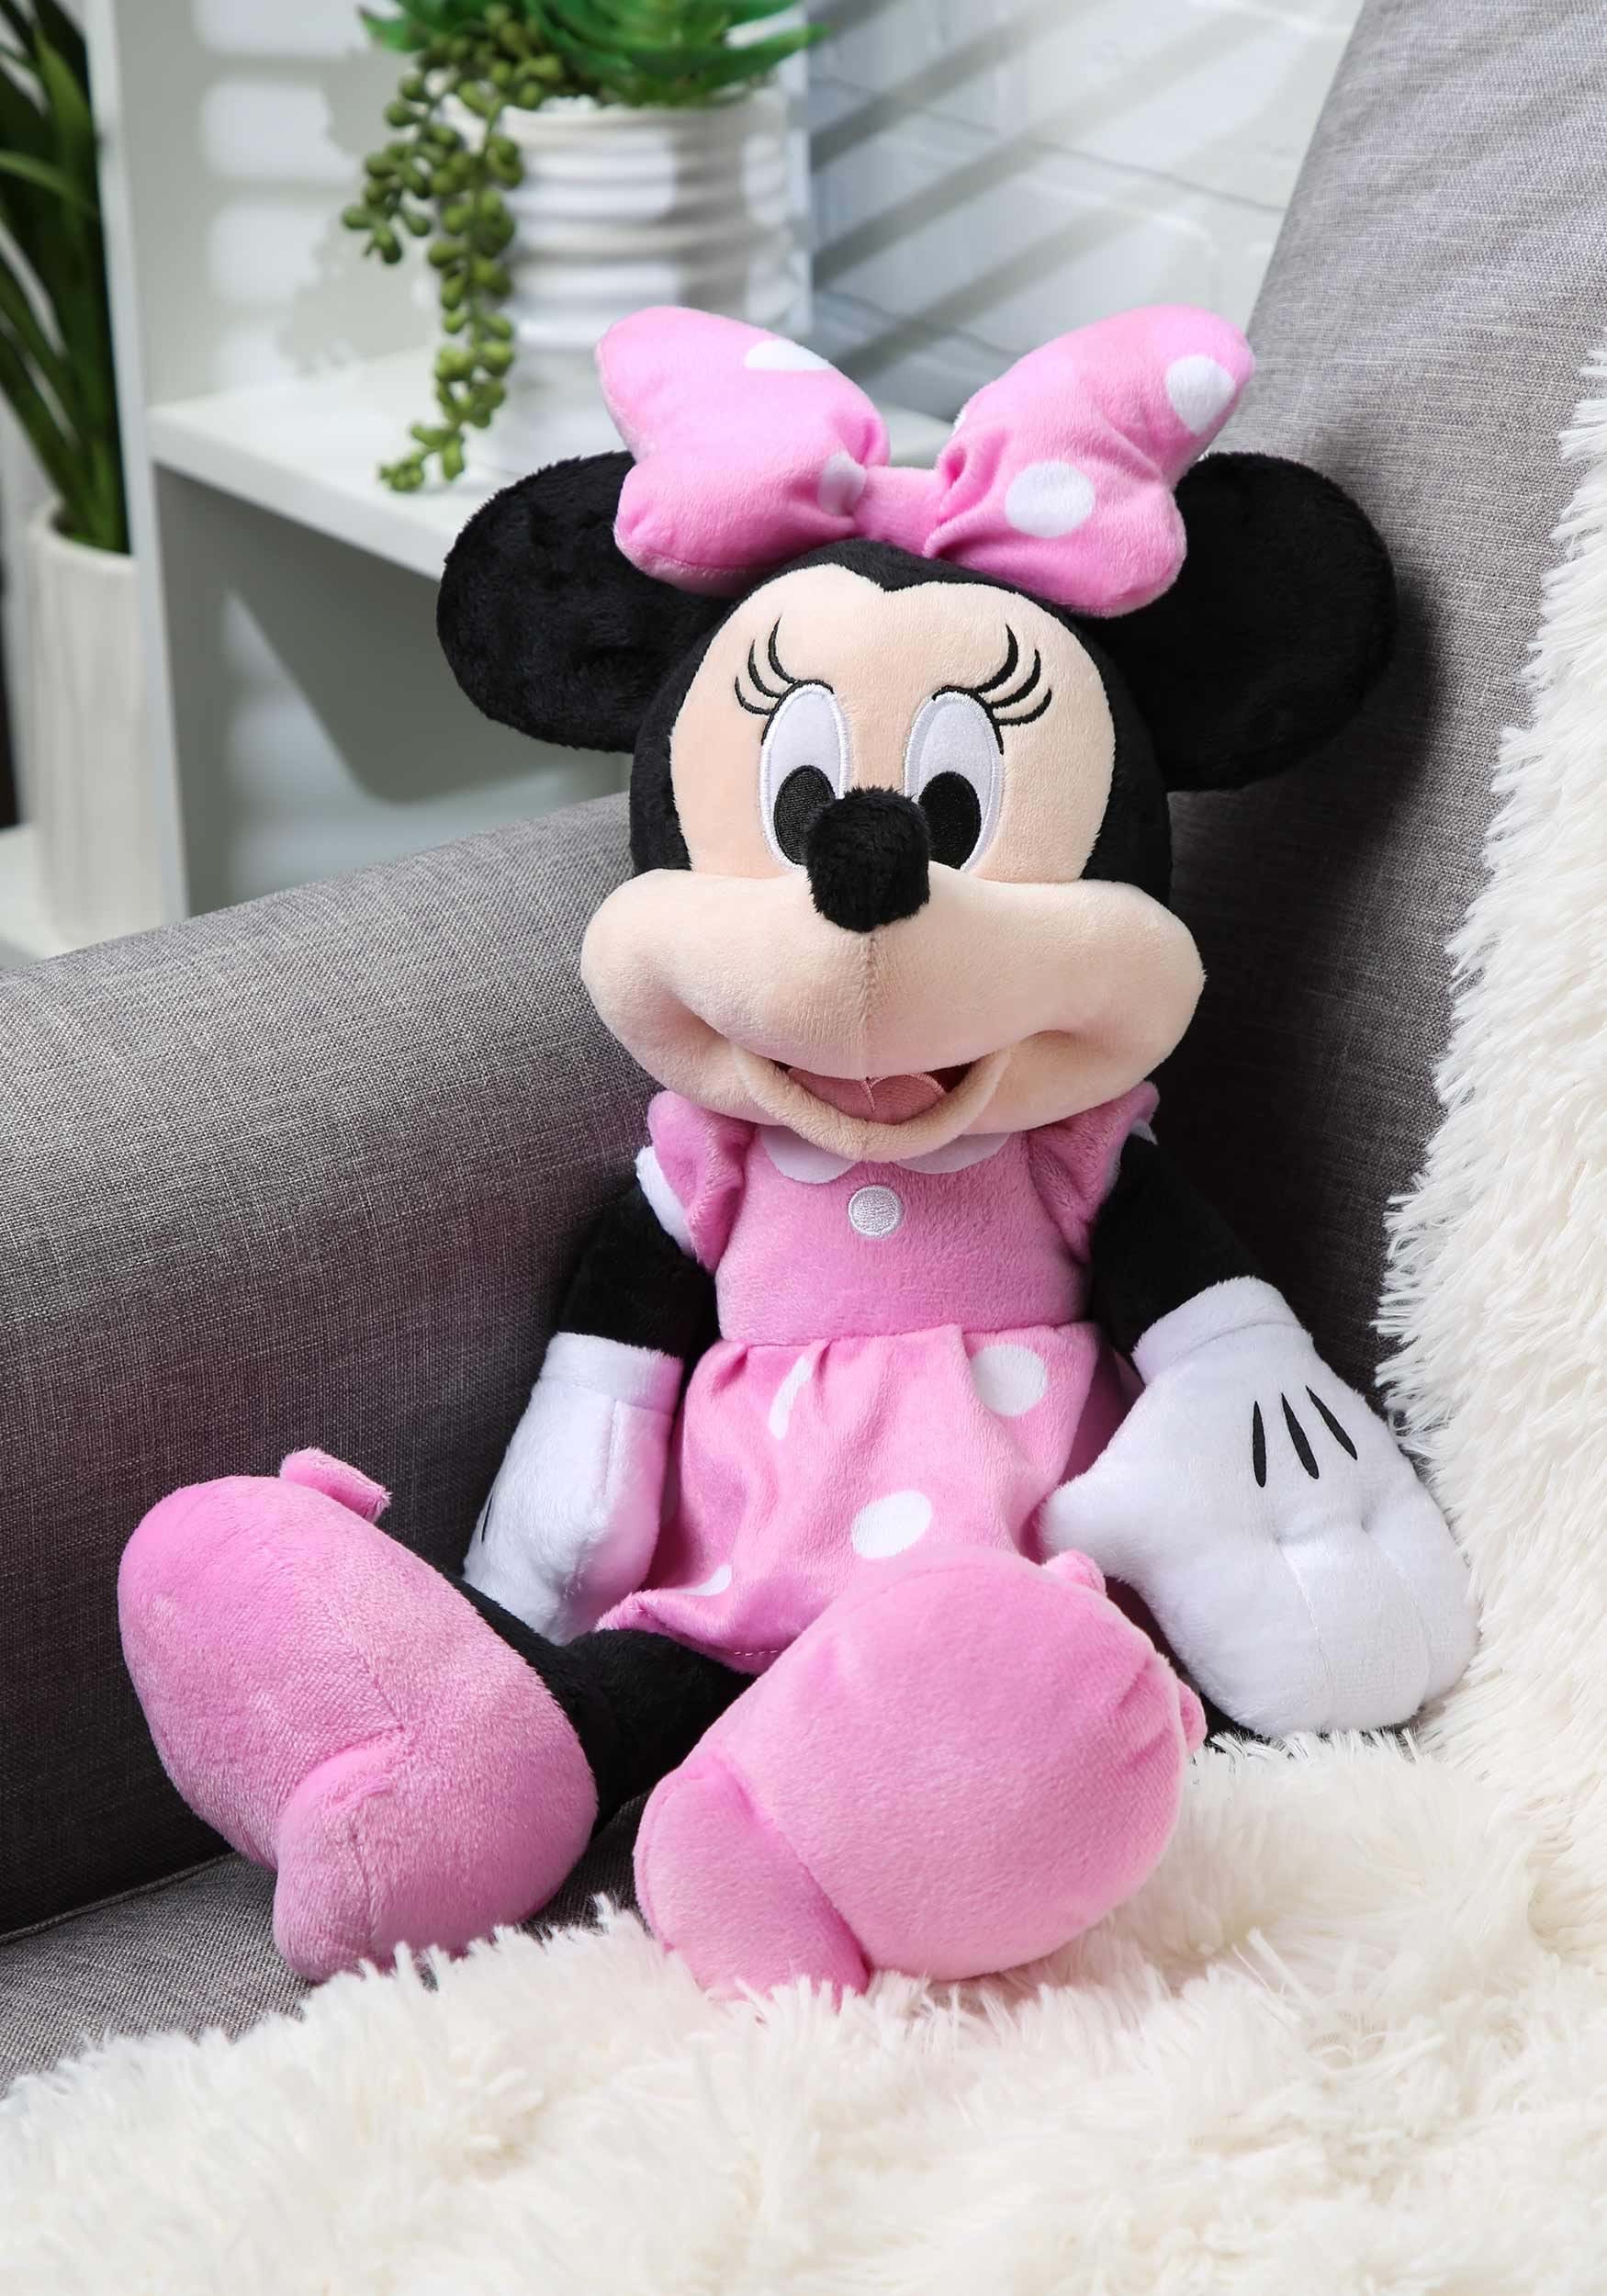 https://images.halloweencostumes.ca/products/36135/1-1/minnie-mouse-18-stuffed-toy.JPG